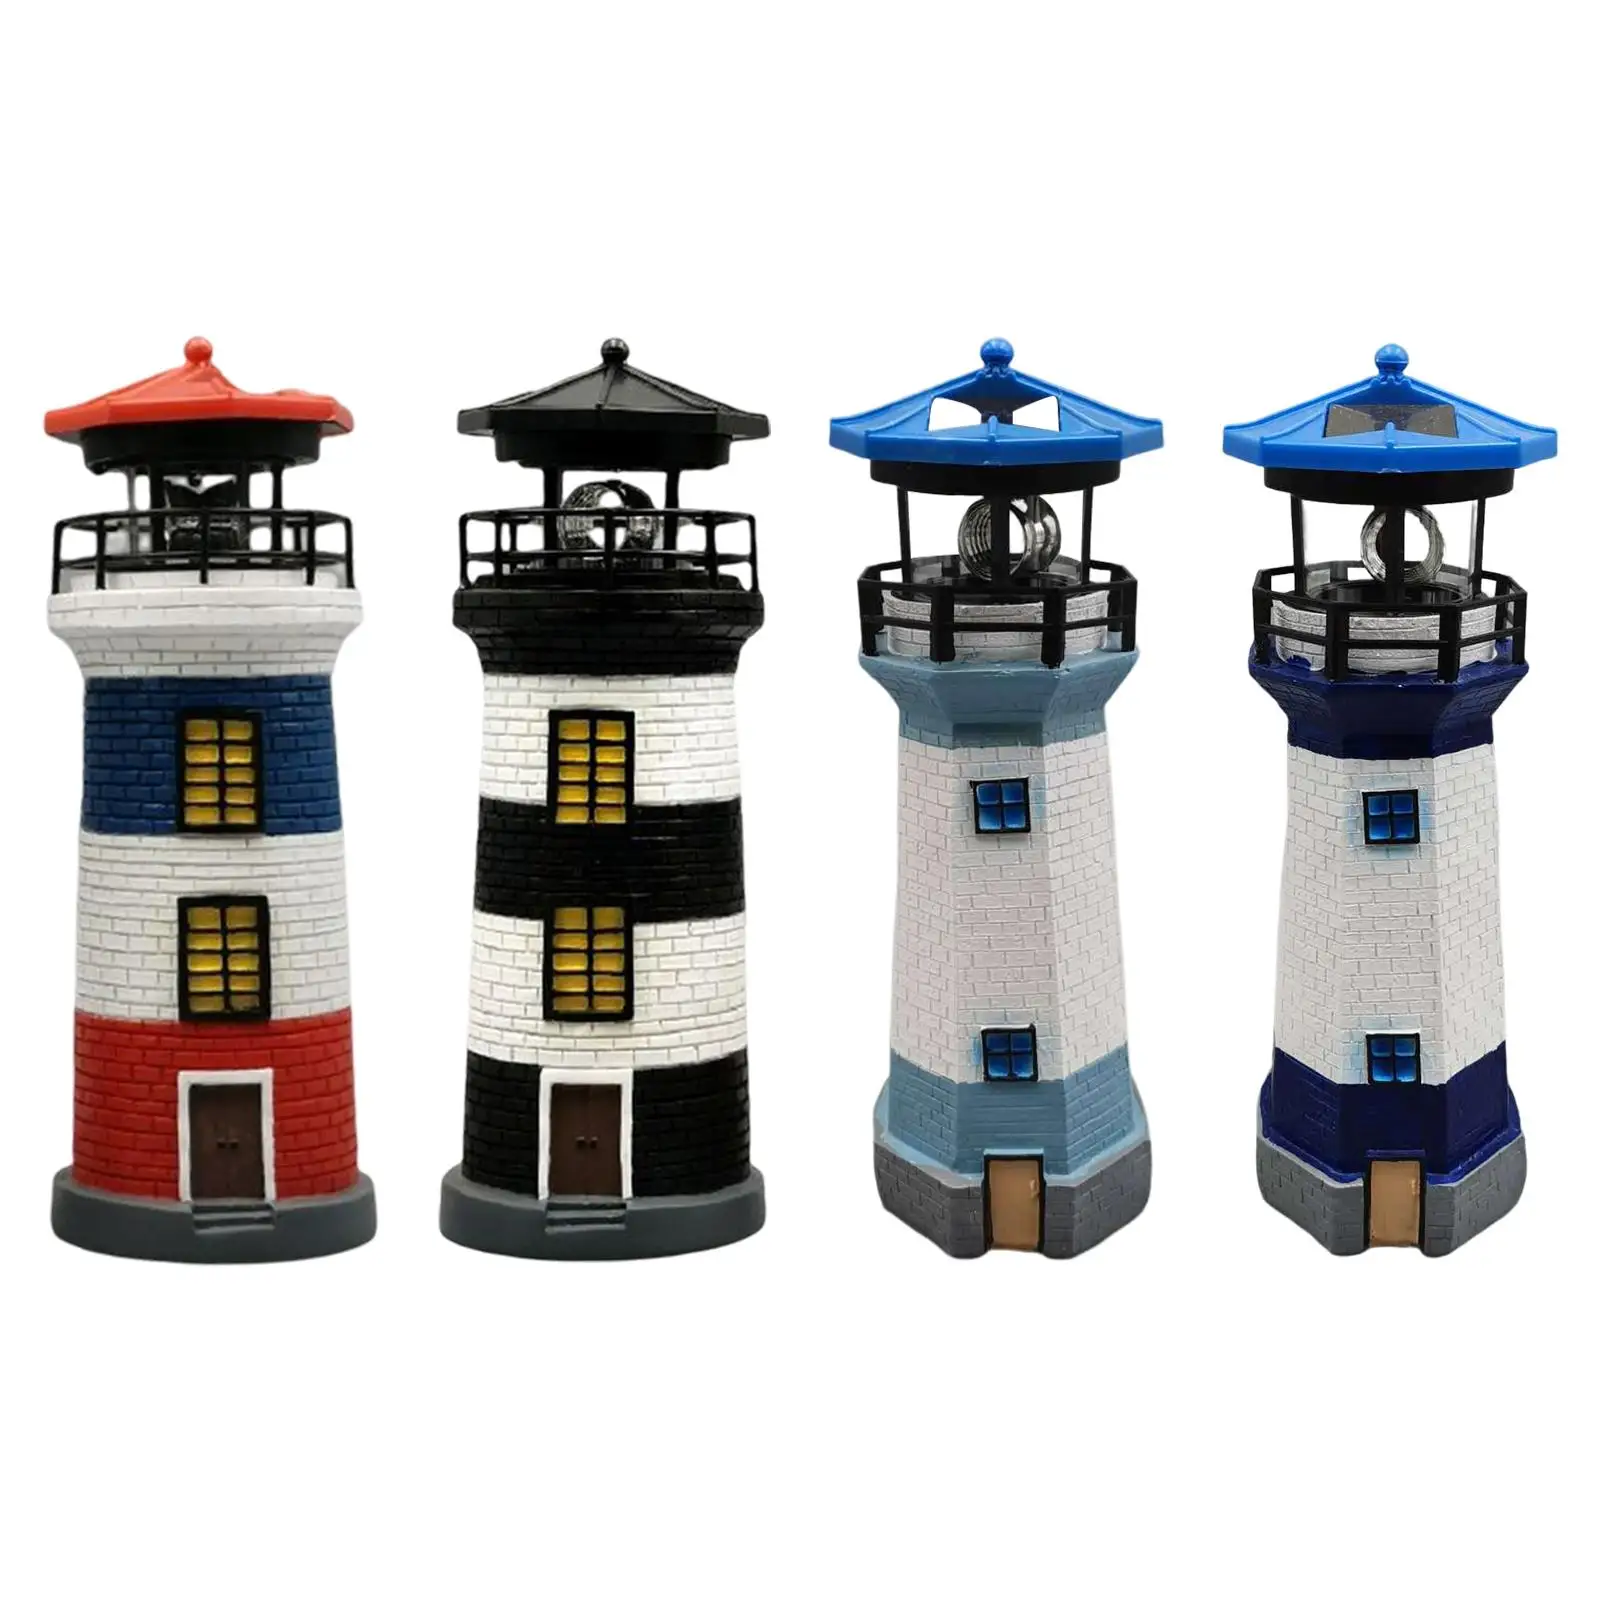 Wind Mill Solar Lighthouse Ornaments Garden Lights Resin Premium Waterproof 360 Degree Rotating for Garden Outdoor Party Balcony